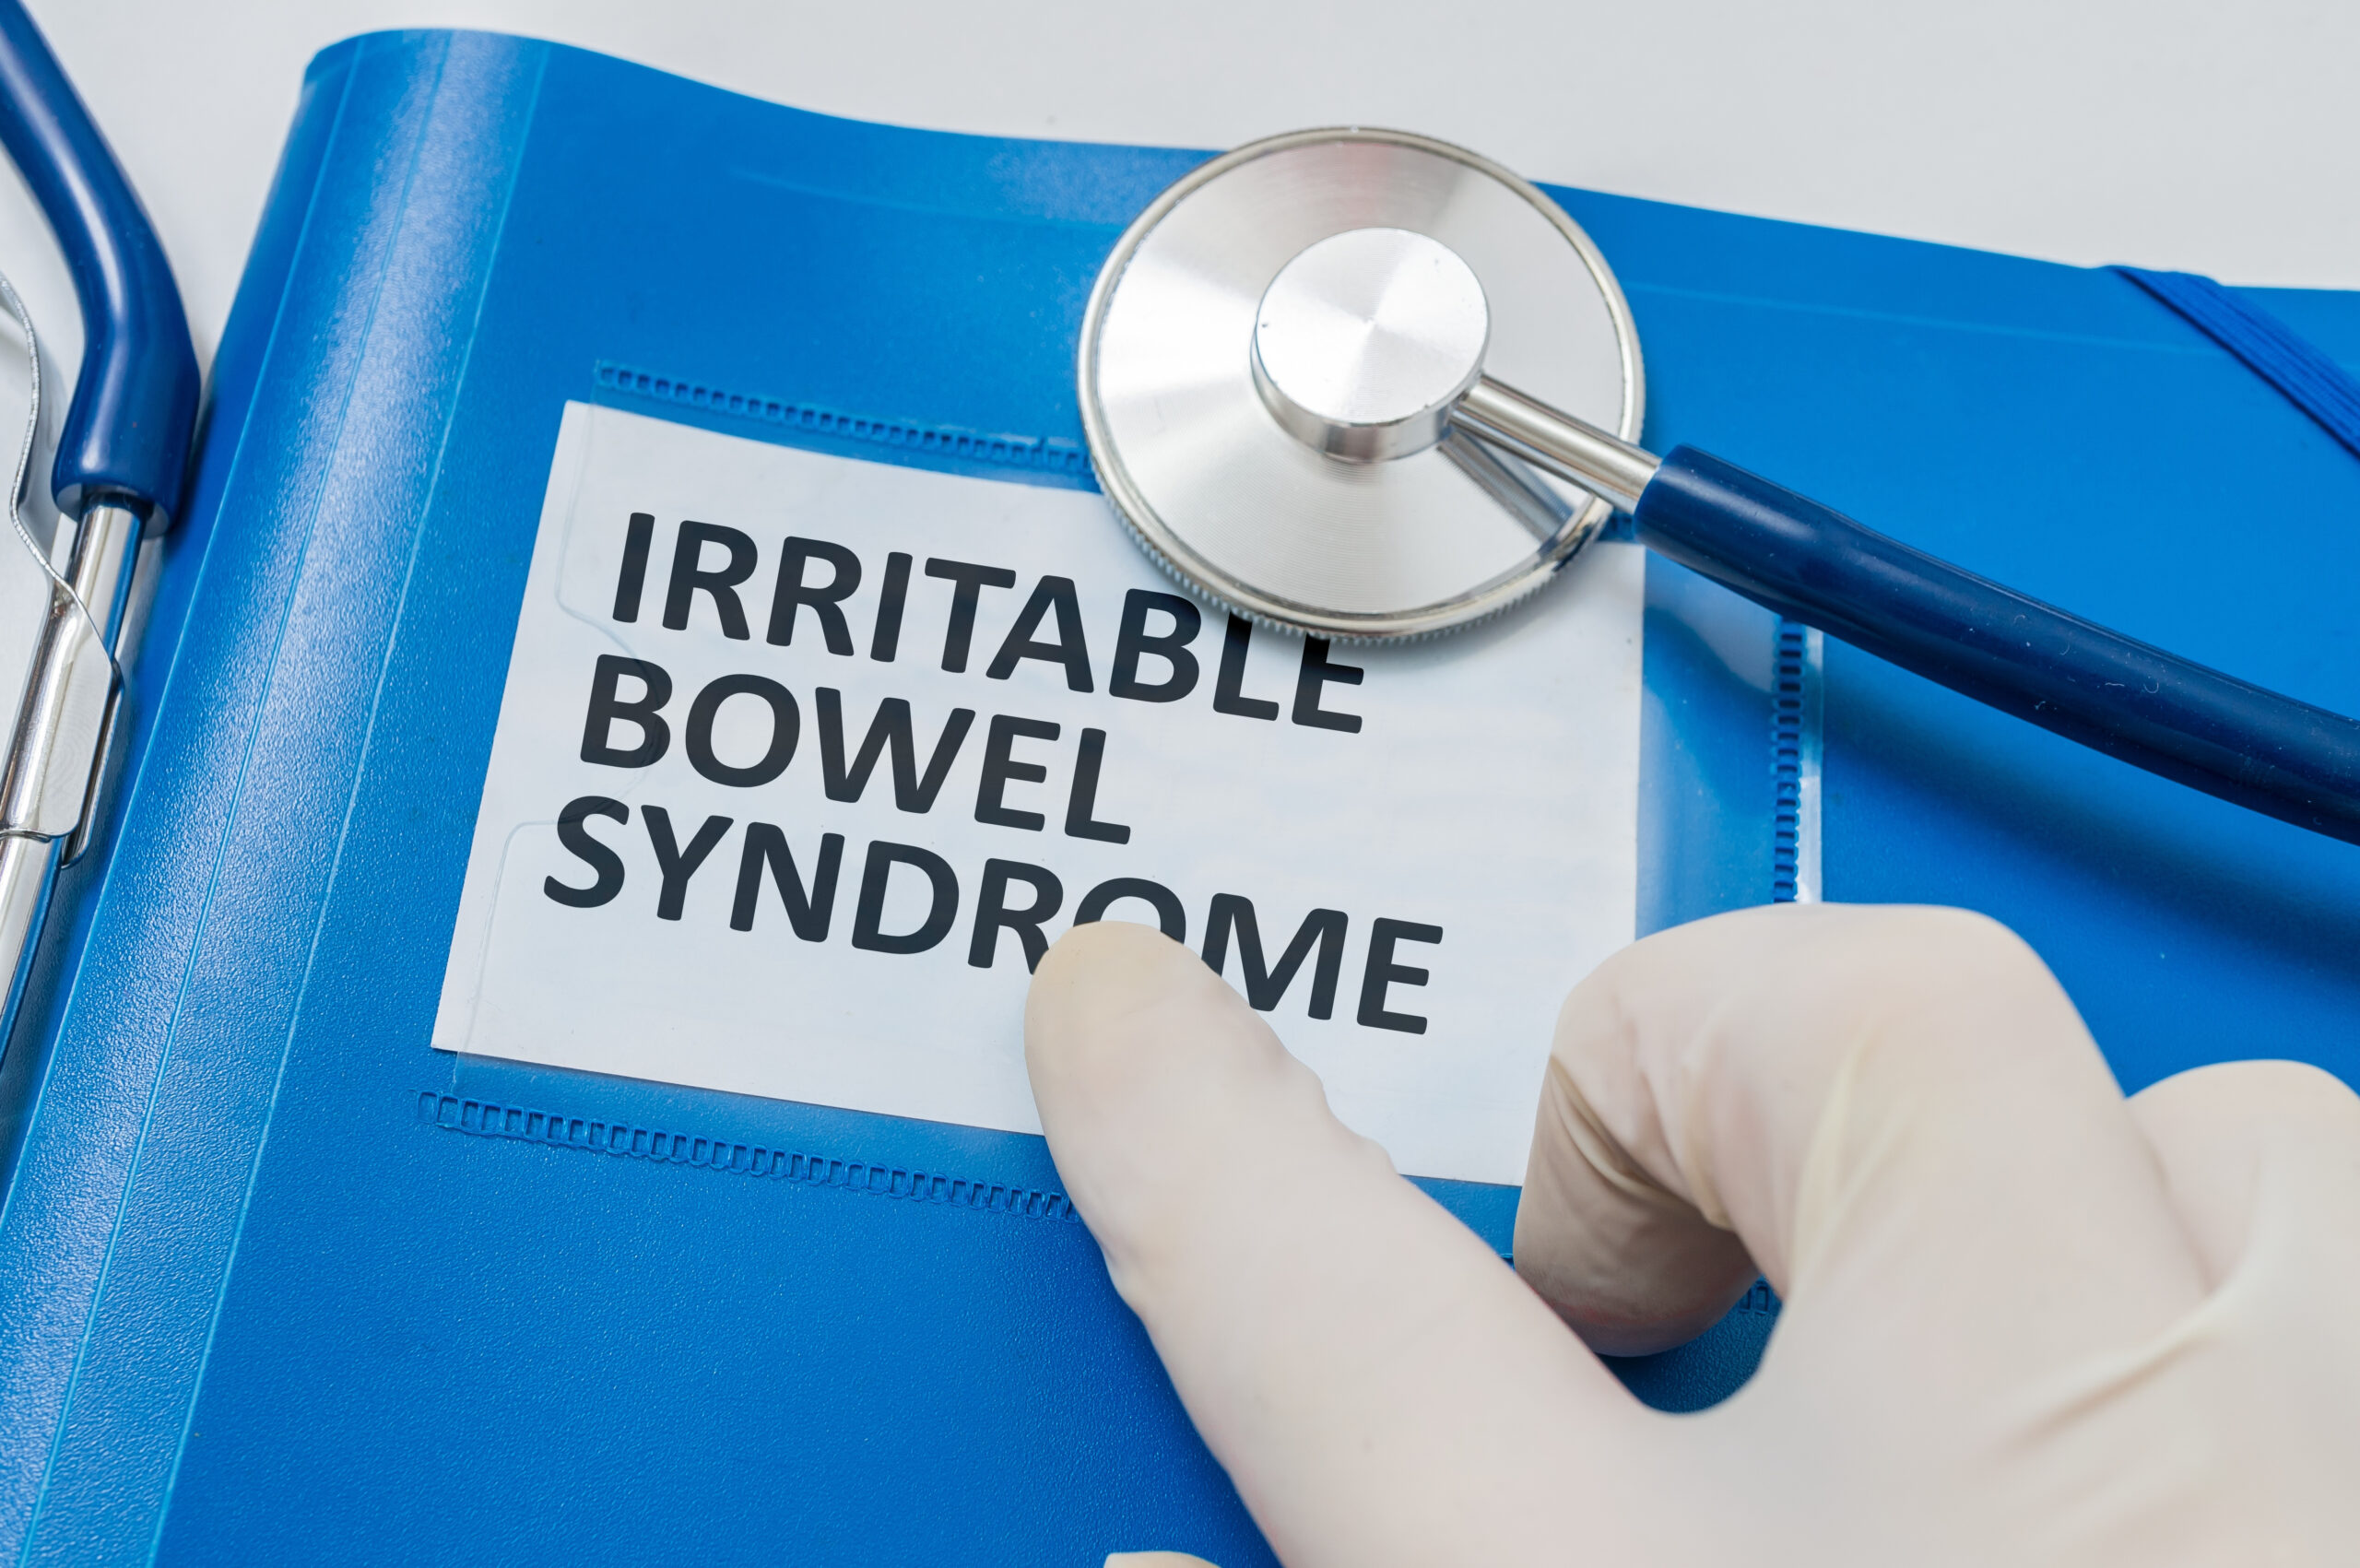 Maintaining A Healthy Lifestyle Might Prevent Up To 60% Of Inflammatory Bowel Disease Cases